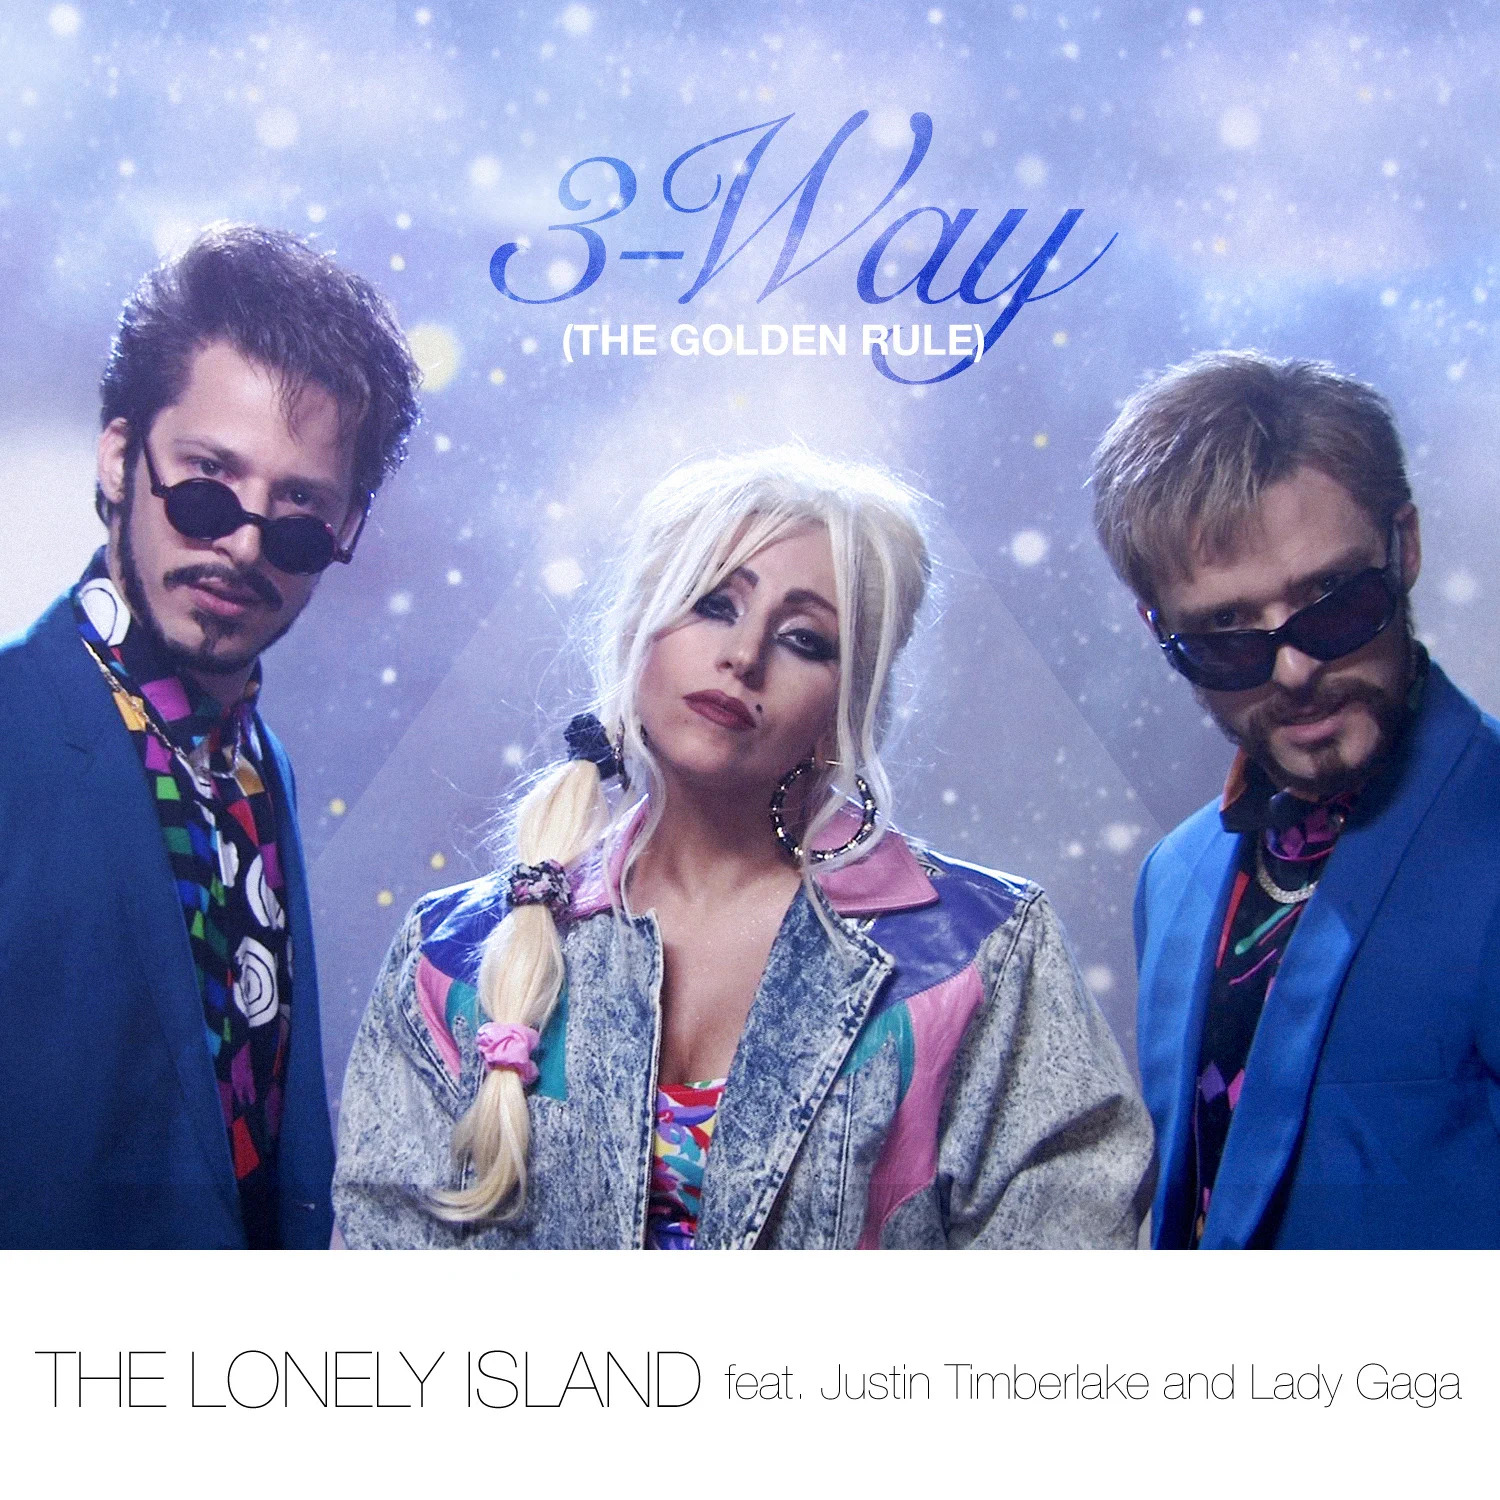 The Lonely Island featuring Justin Timberlake & Lady Gaga — 3-Way (The Golden Rule) cover artwork